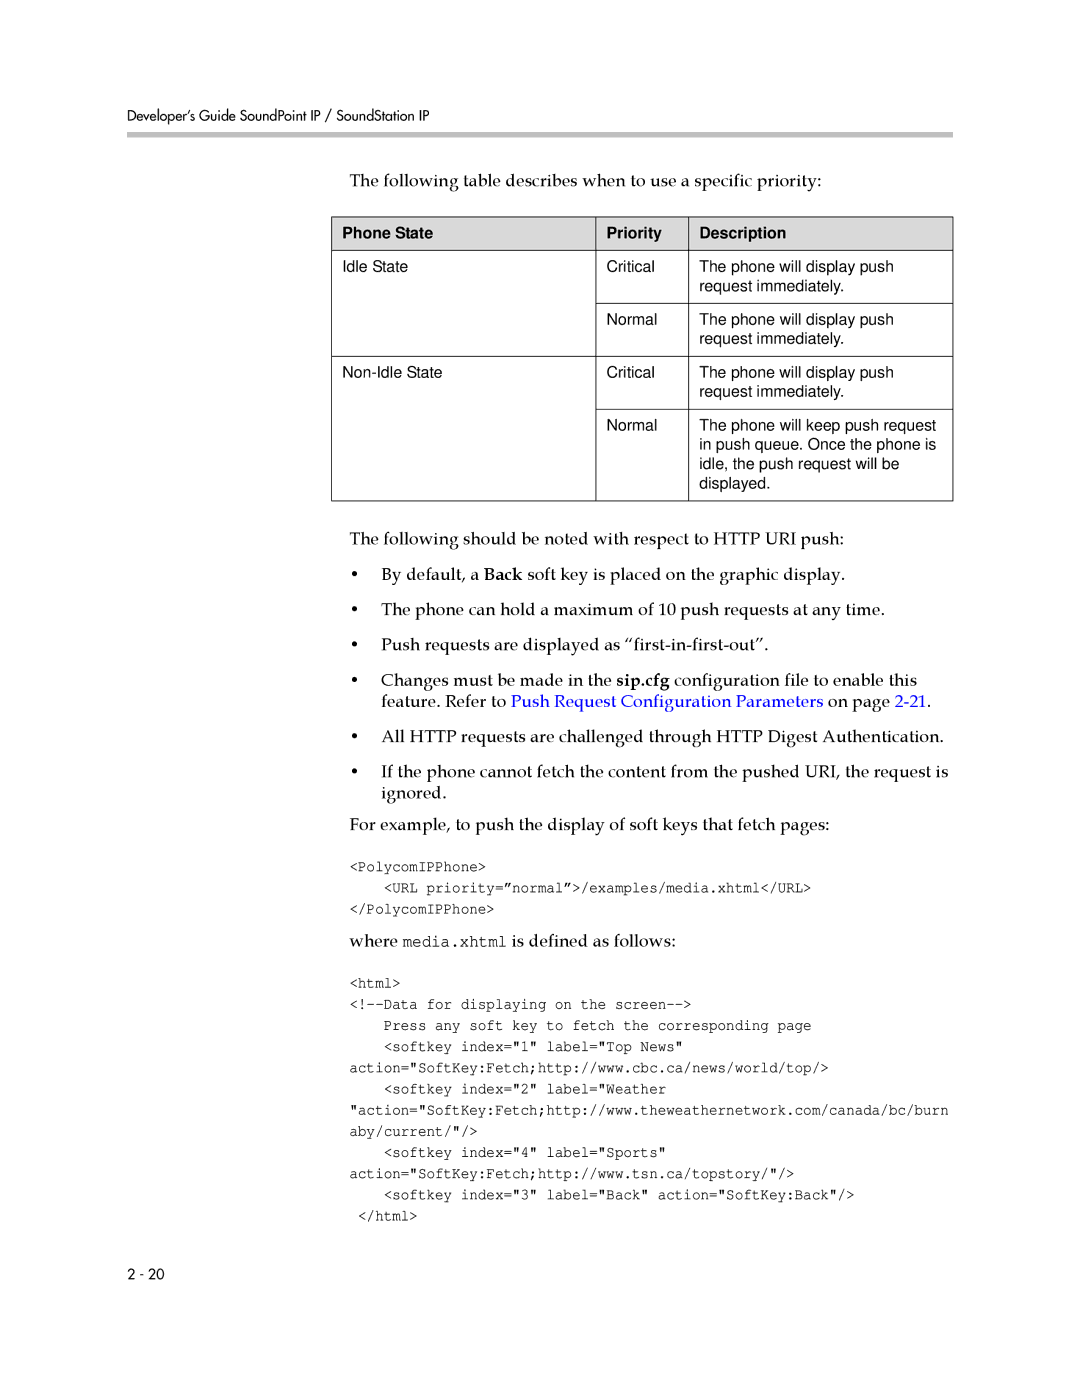 Polycom SIP 3.1 manual Following table describes when to use a specific priority, Where media.xhtml is defined as follows 